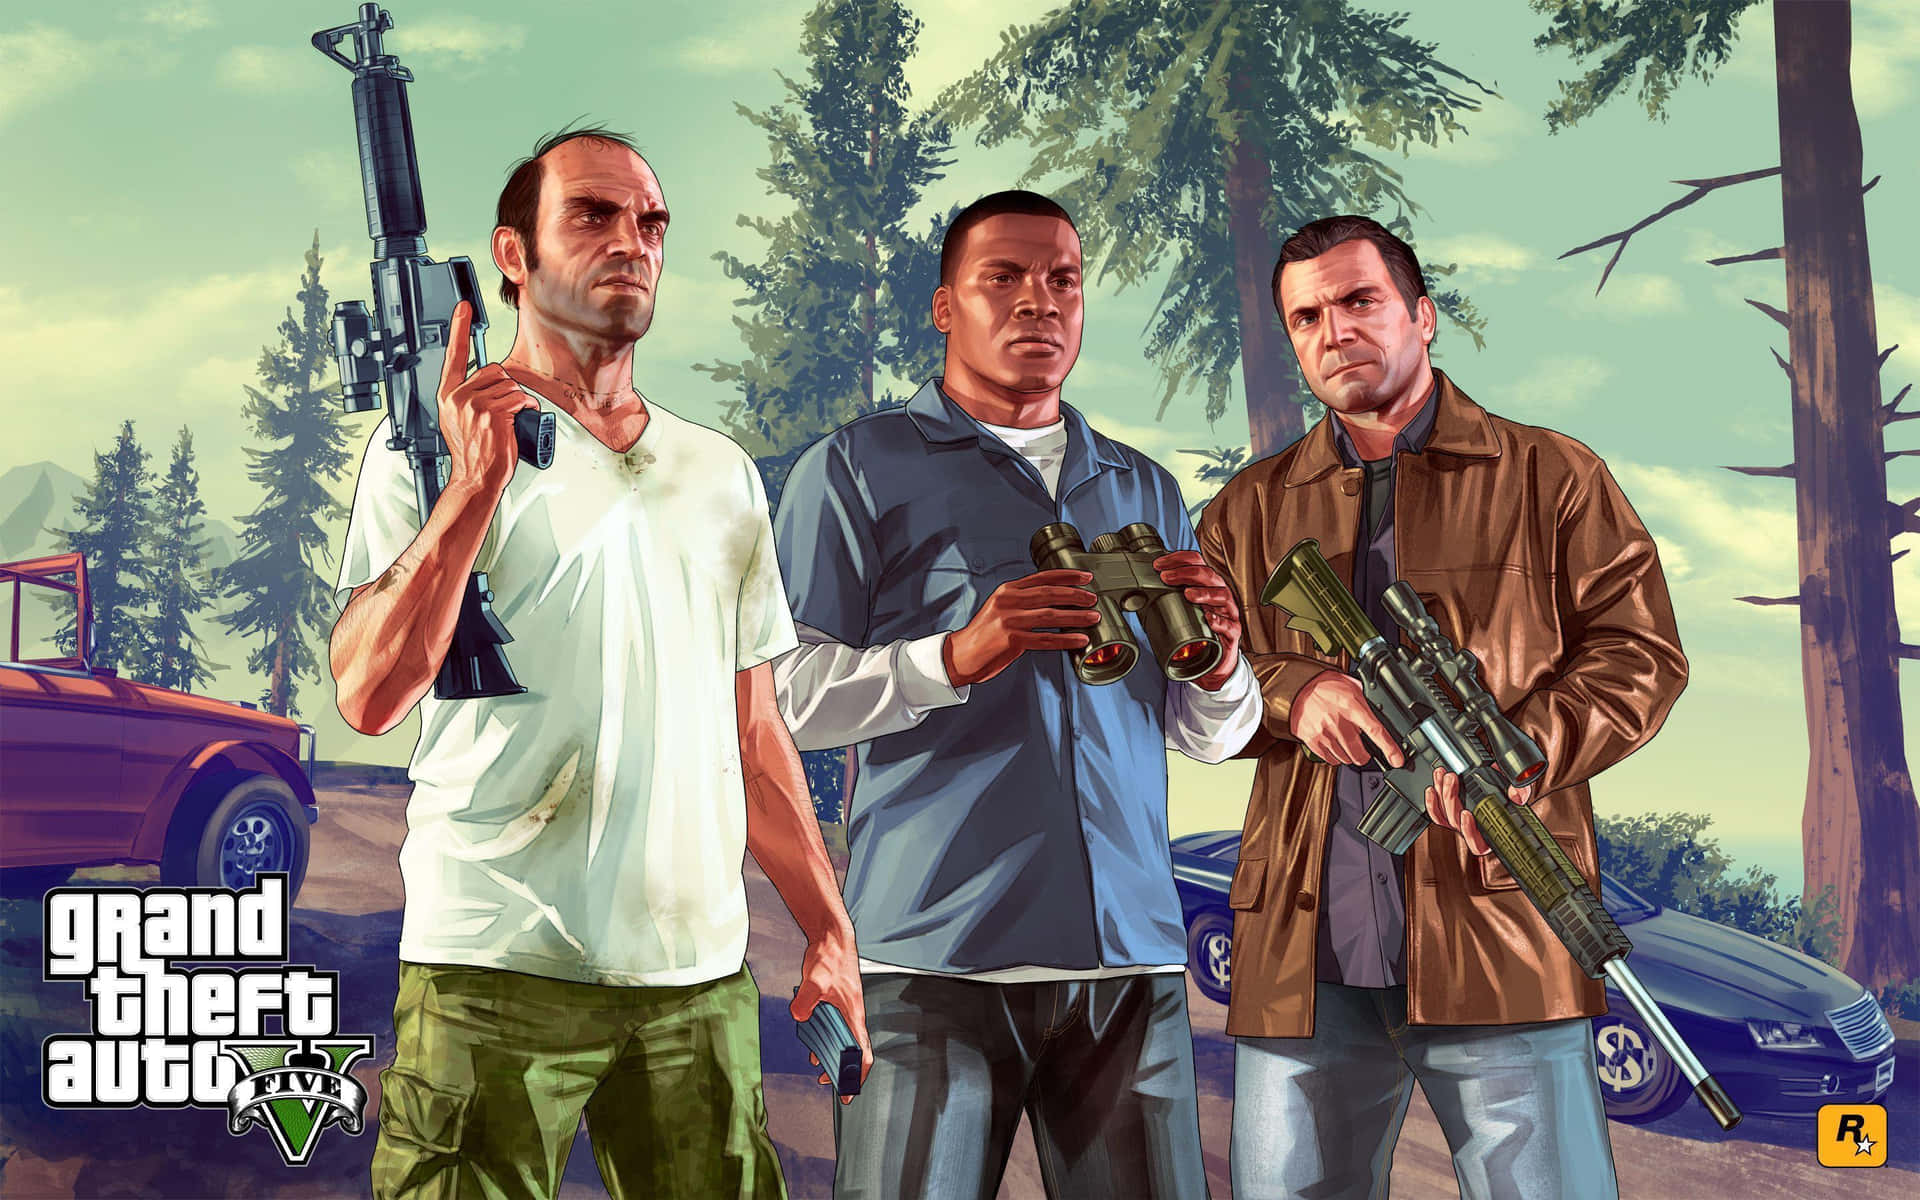 Play the best open-world action game of the decade with GTA 5 Desktop Wallpaper